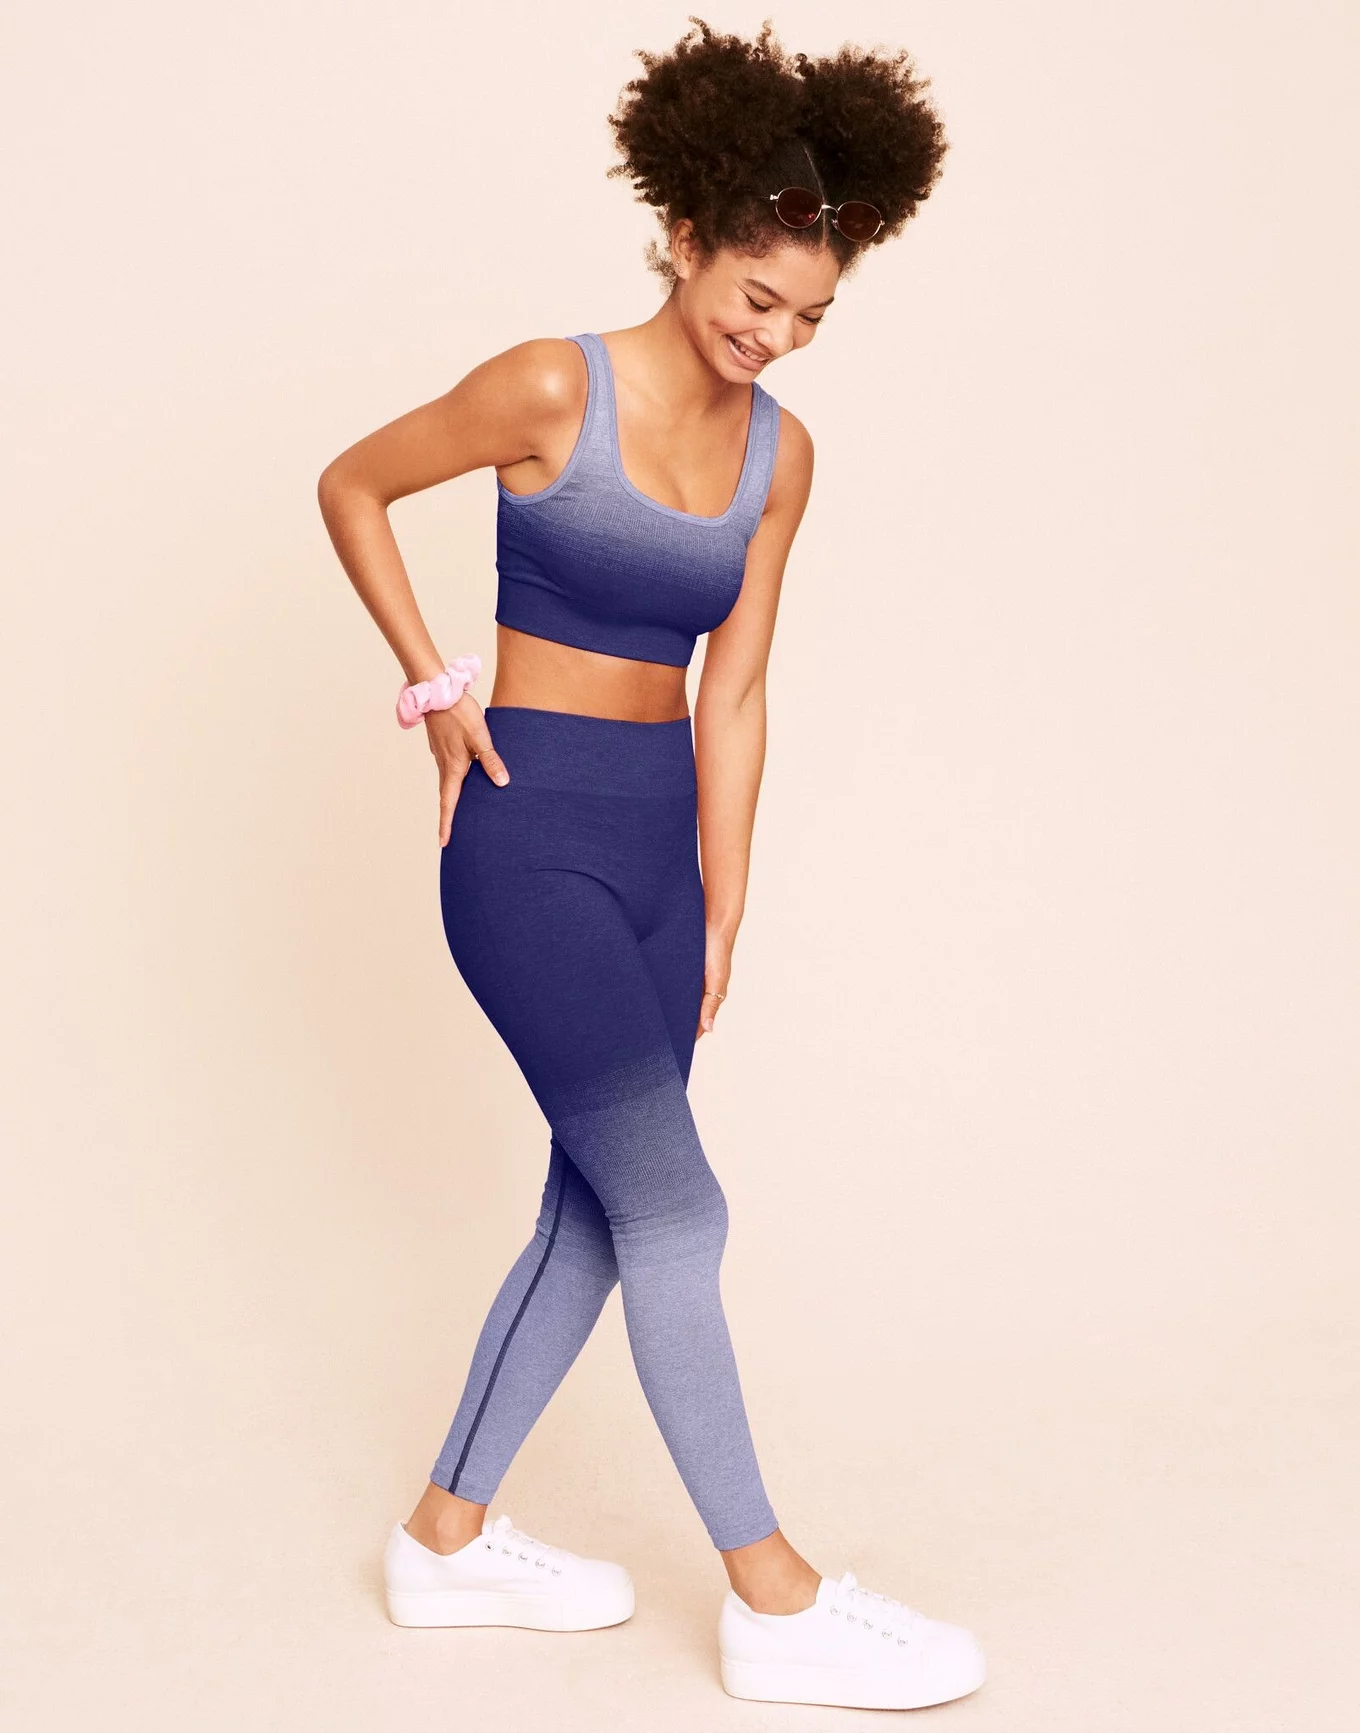 ROSES ARE BLUE Active Leggings  Follow us on Instagram @FAIRSHADE